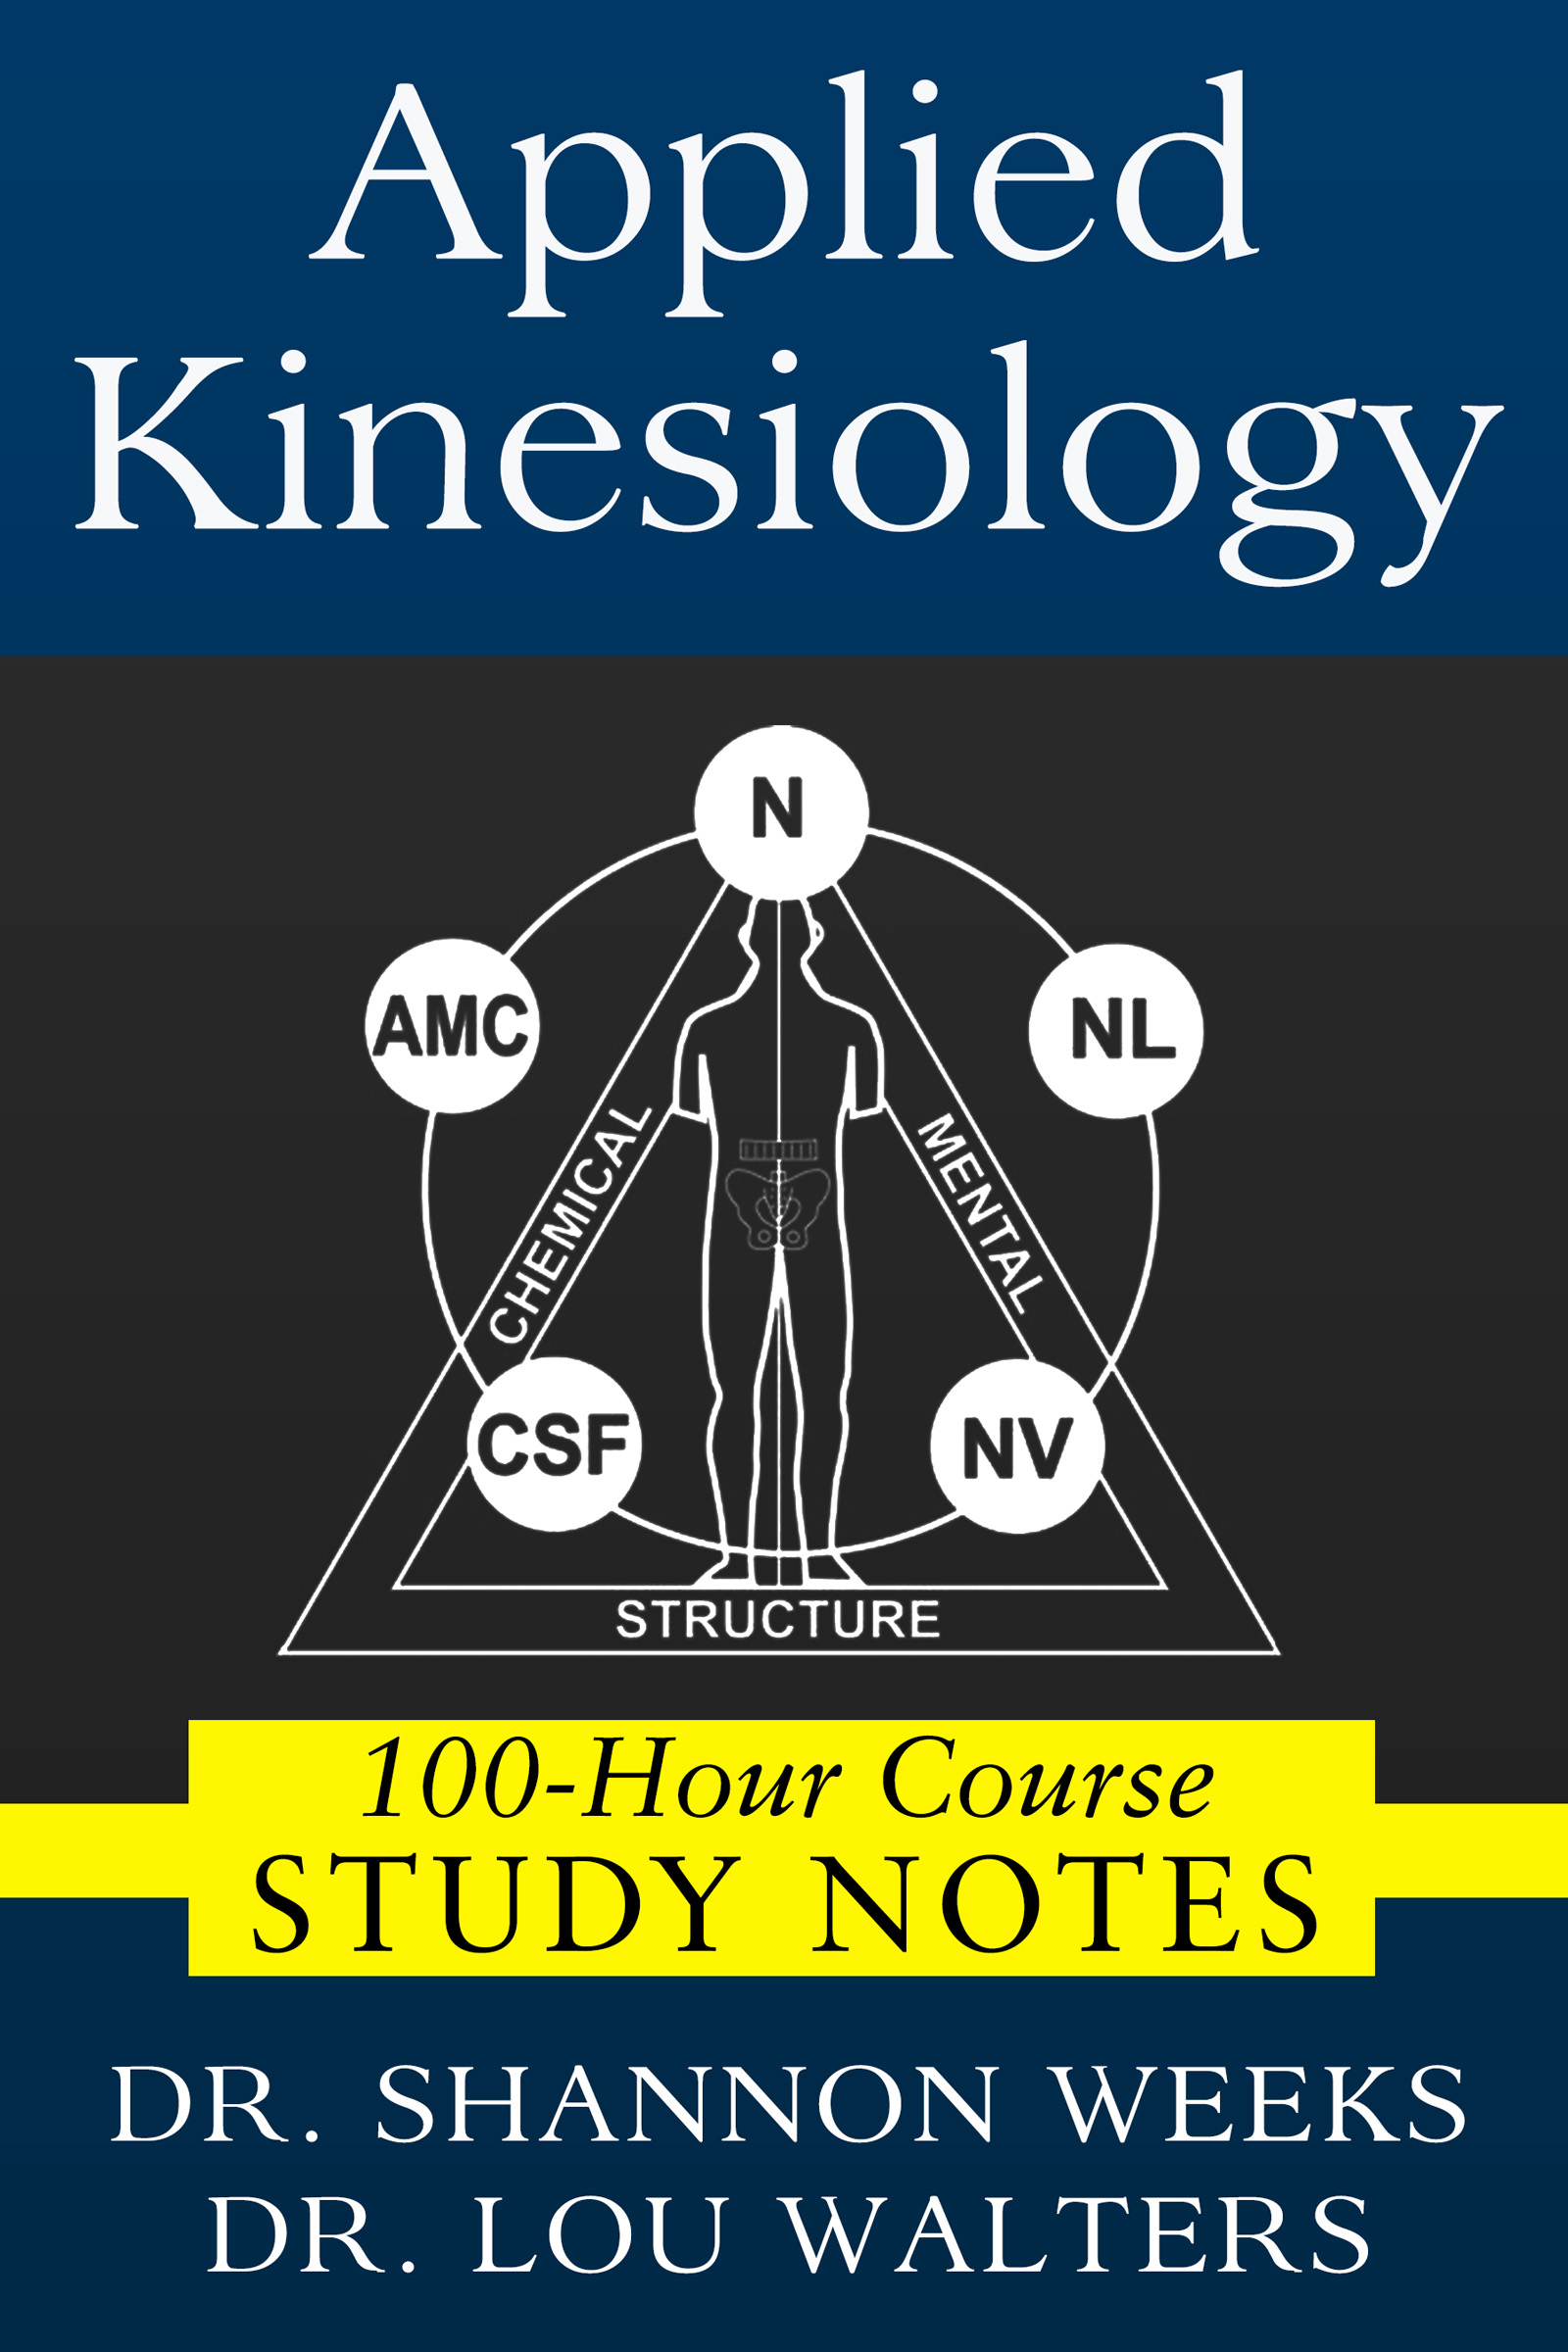 research proposal kinesiology